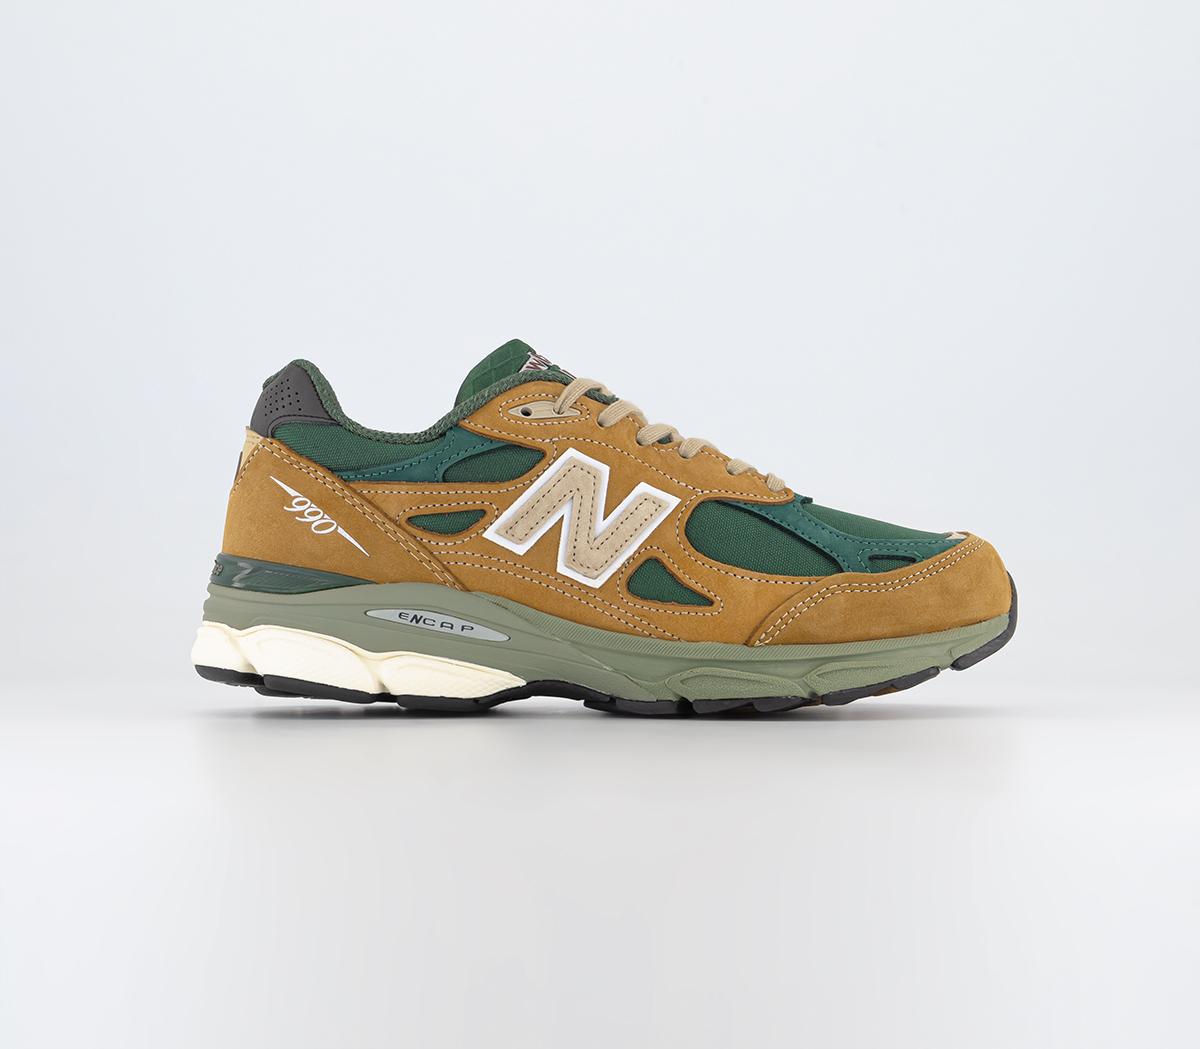 New Balance990v3 Made in USA TrainersTan